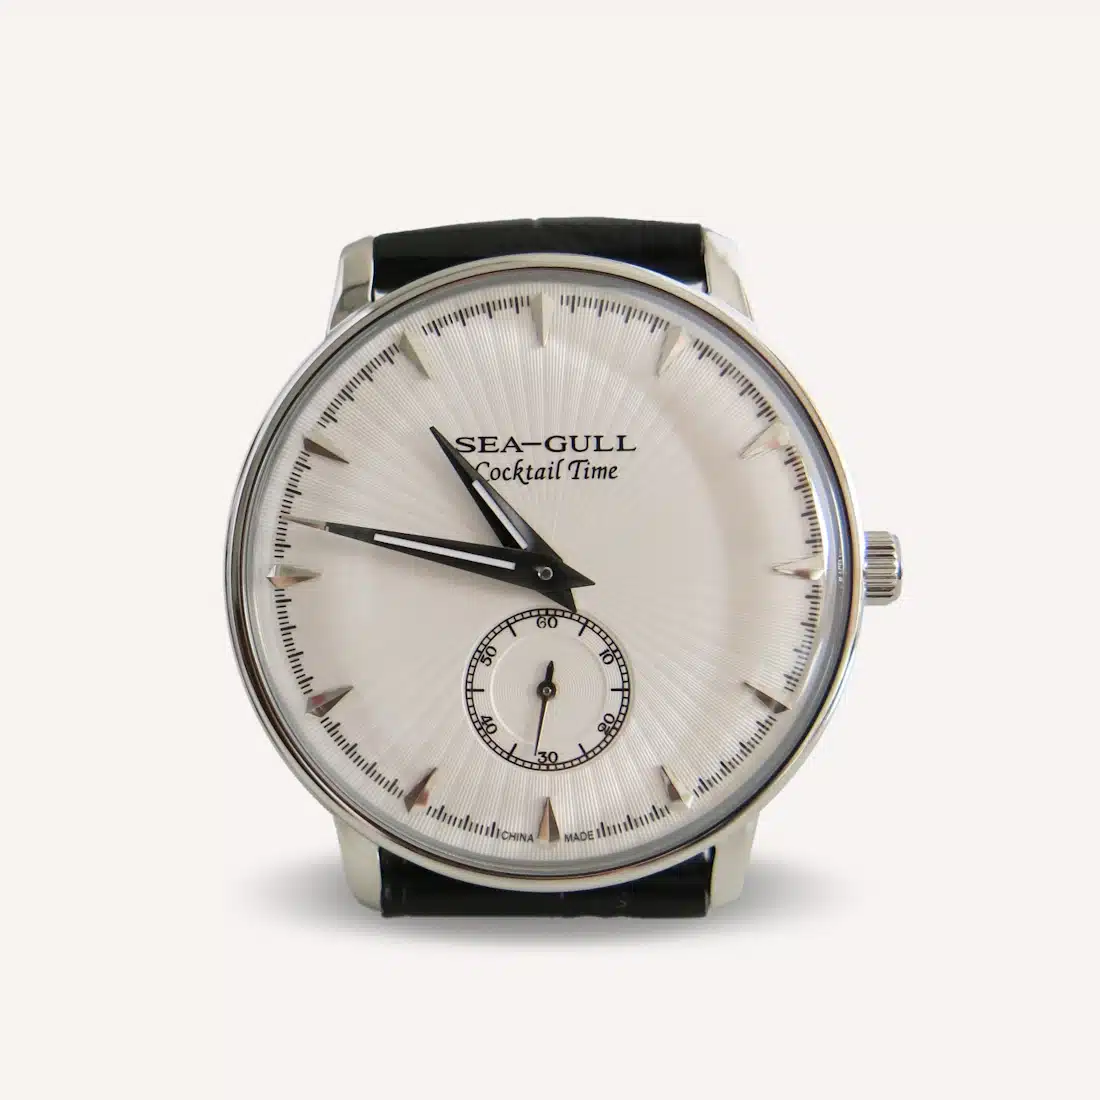 SeaGull 38mm Hand Wind Cocktail Time Dress Watch